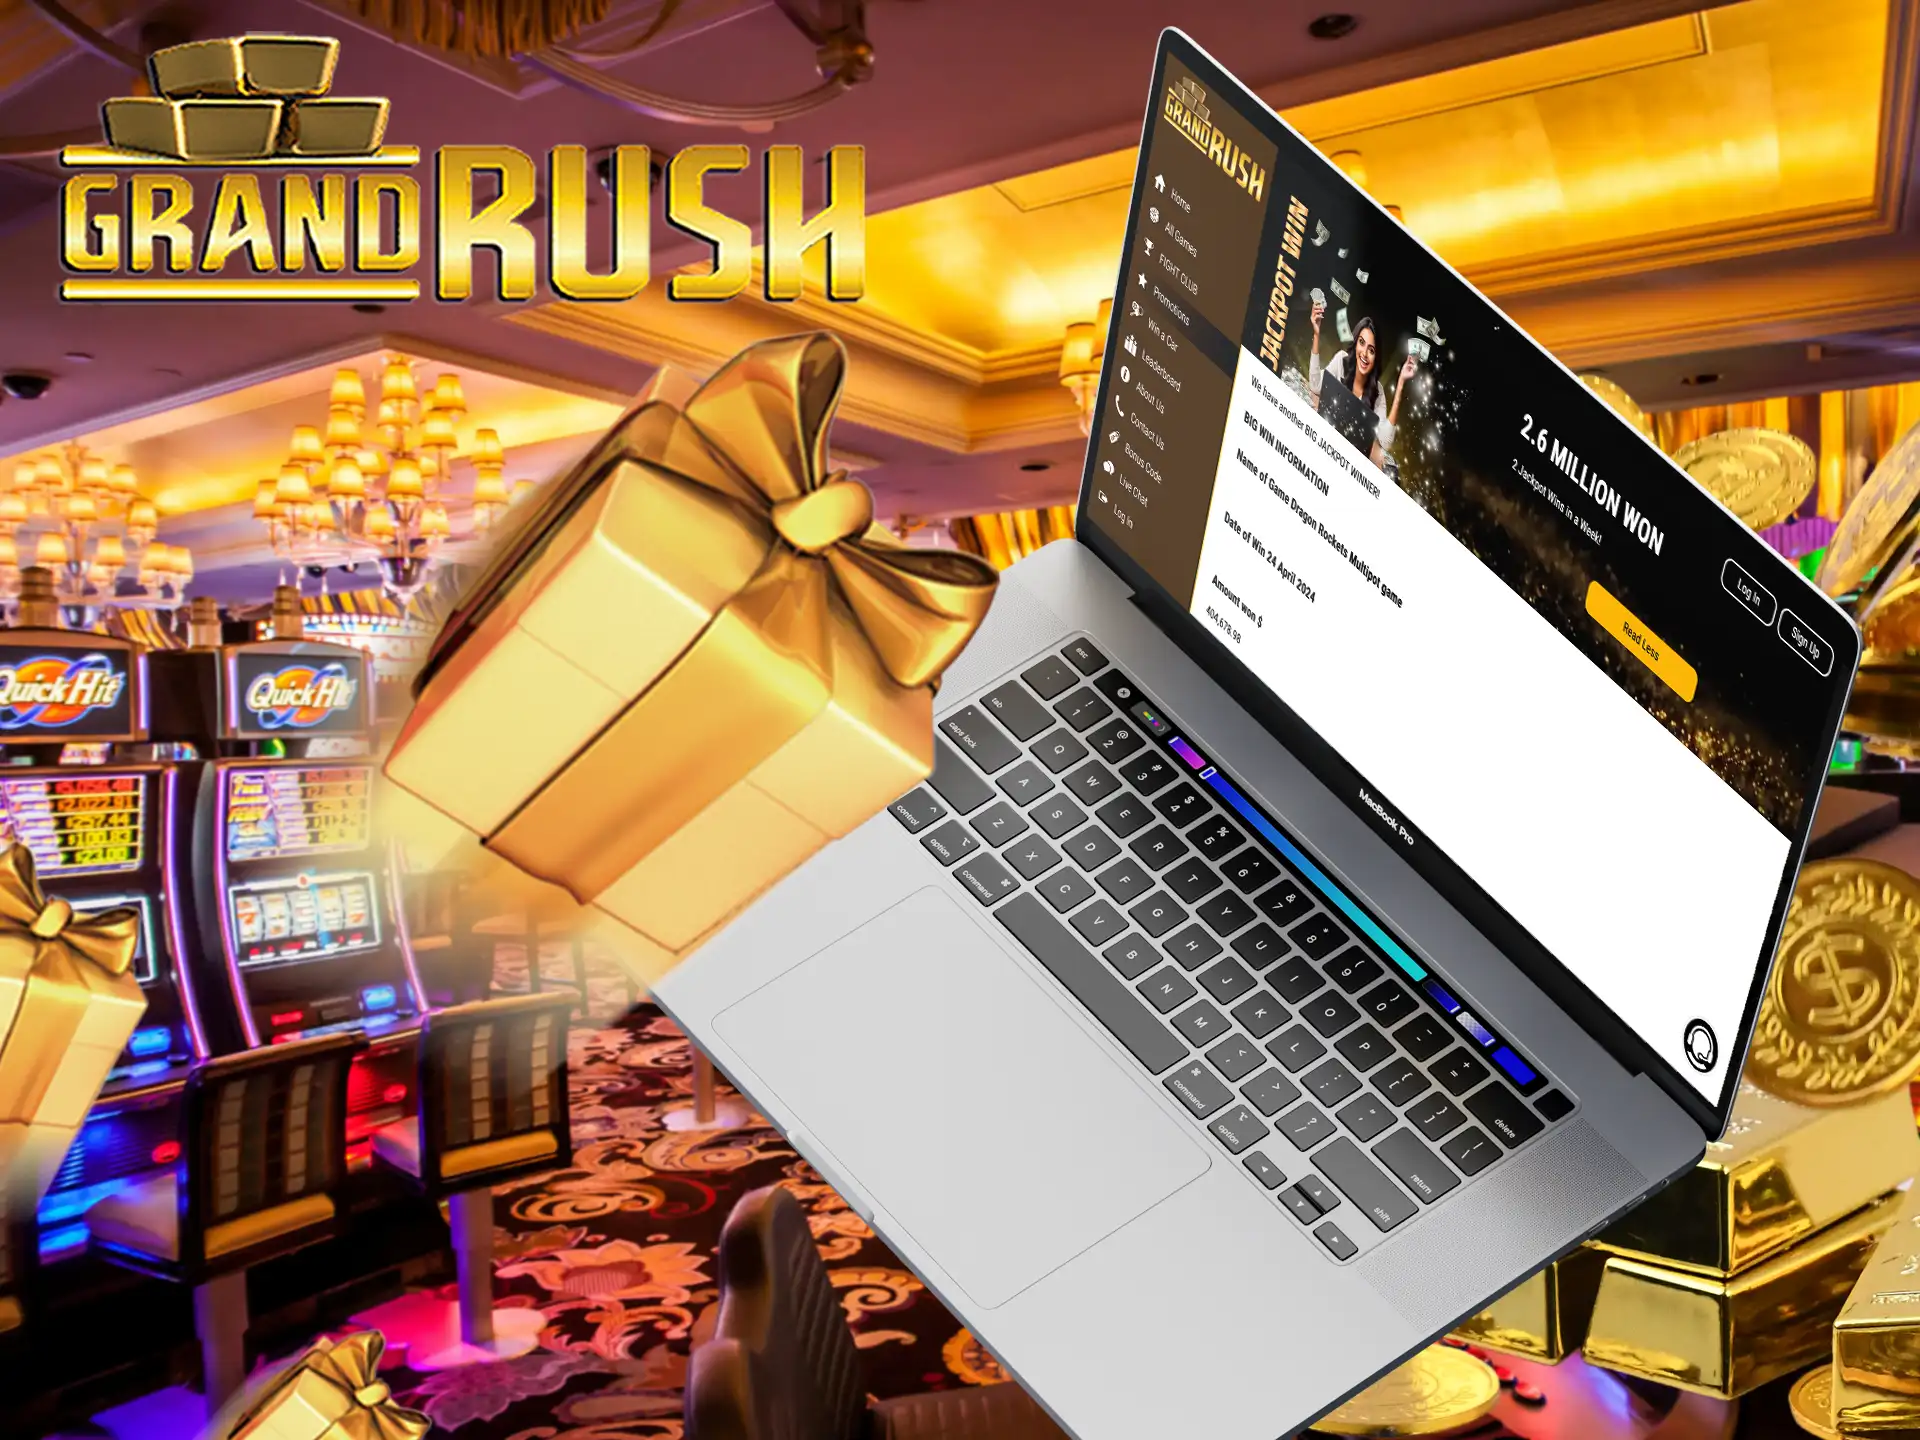 Play slots and try to get the Grand Rush jackpot bonus.